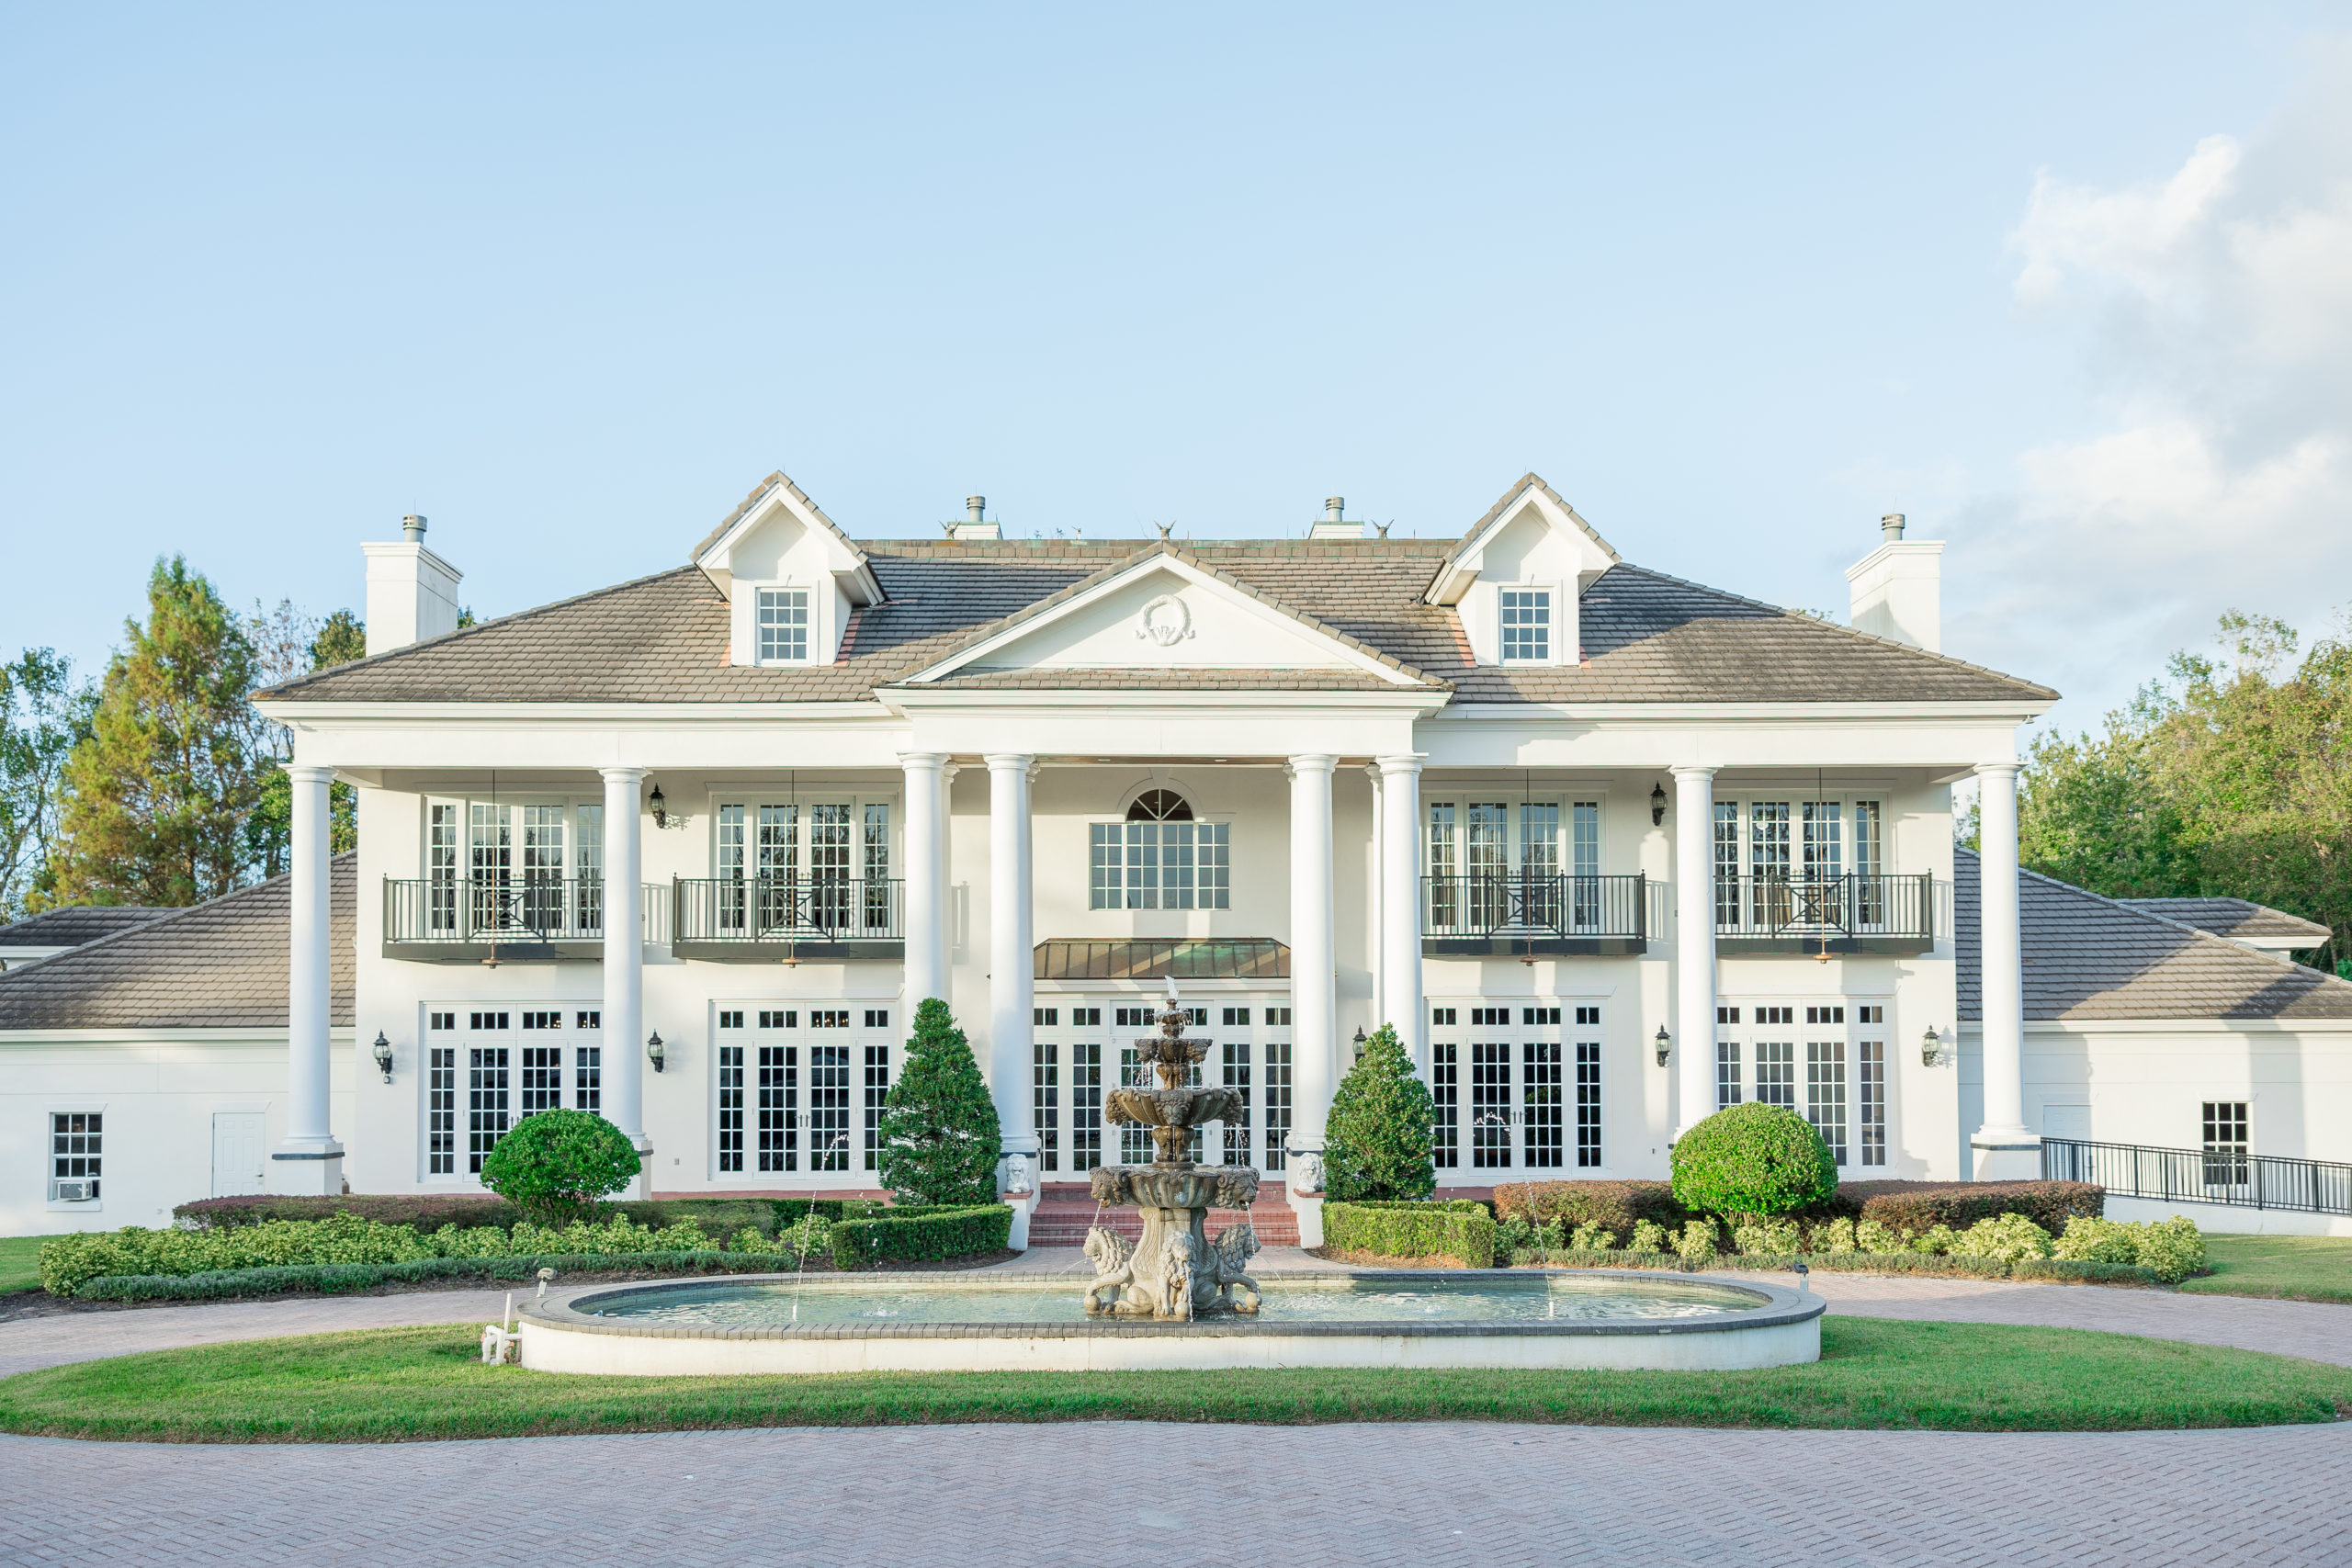 White estate with columns and fountain in the middle of the driveway with fresh cut lawn for Luxmore Grande Wedding